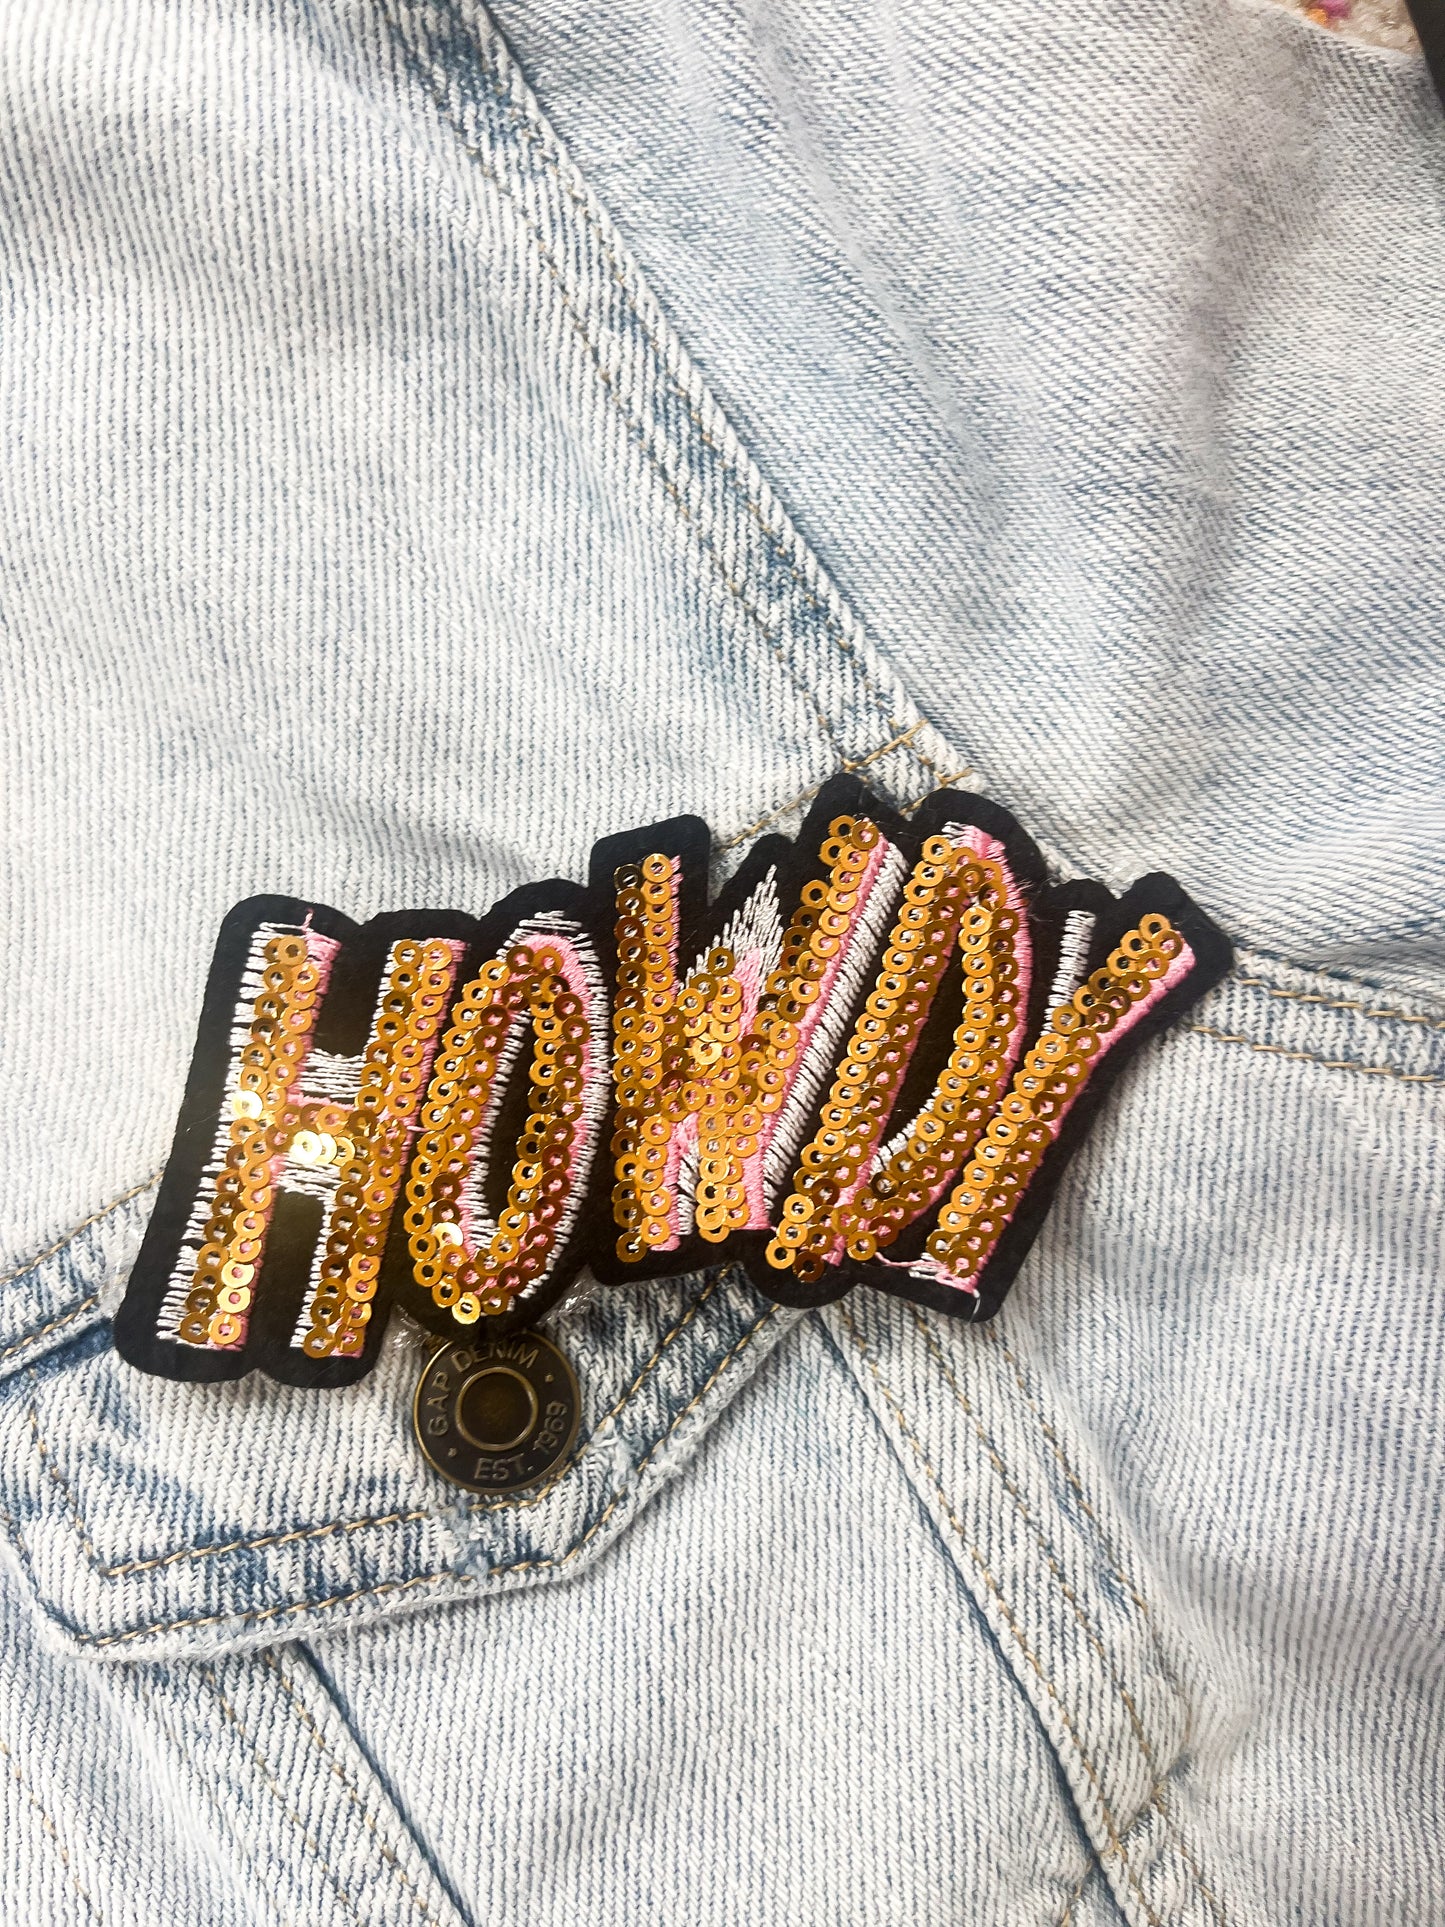 Sequin howdy patch